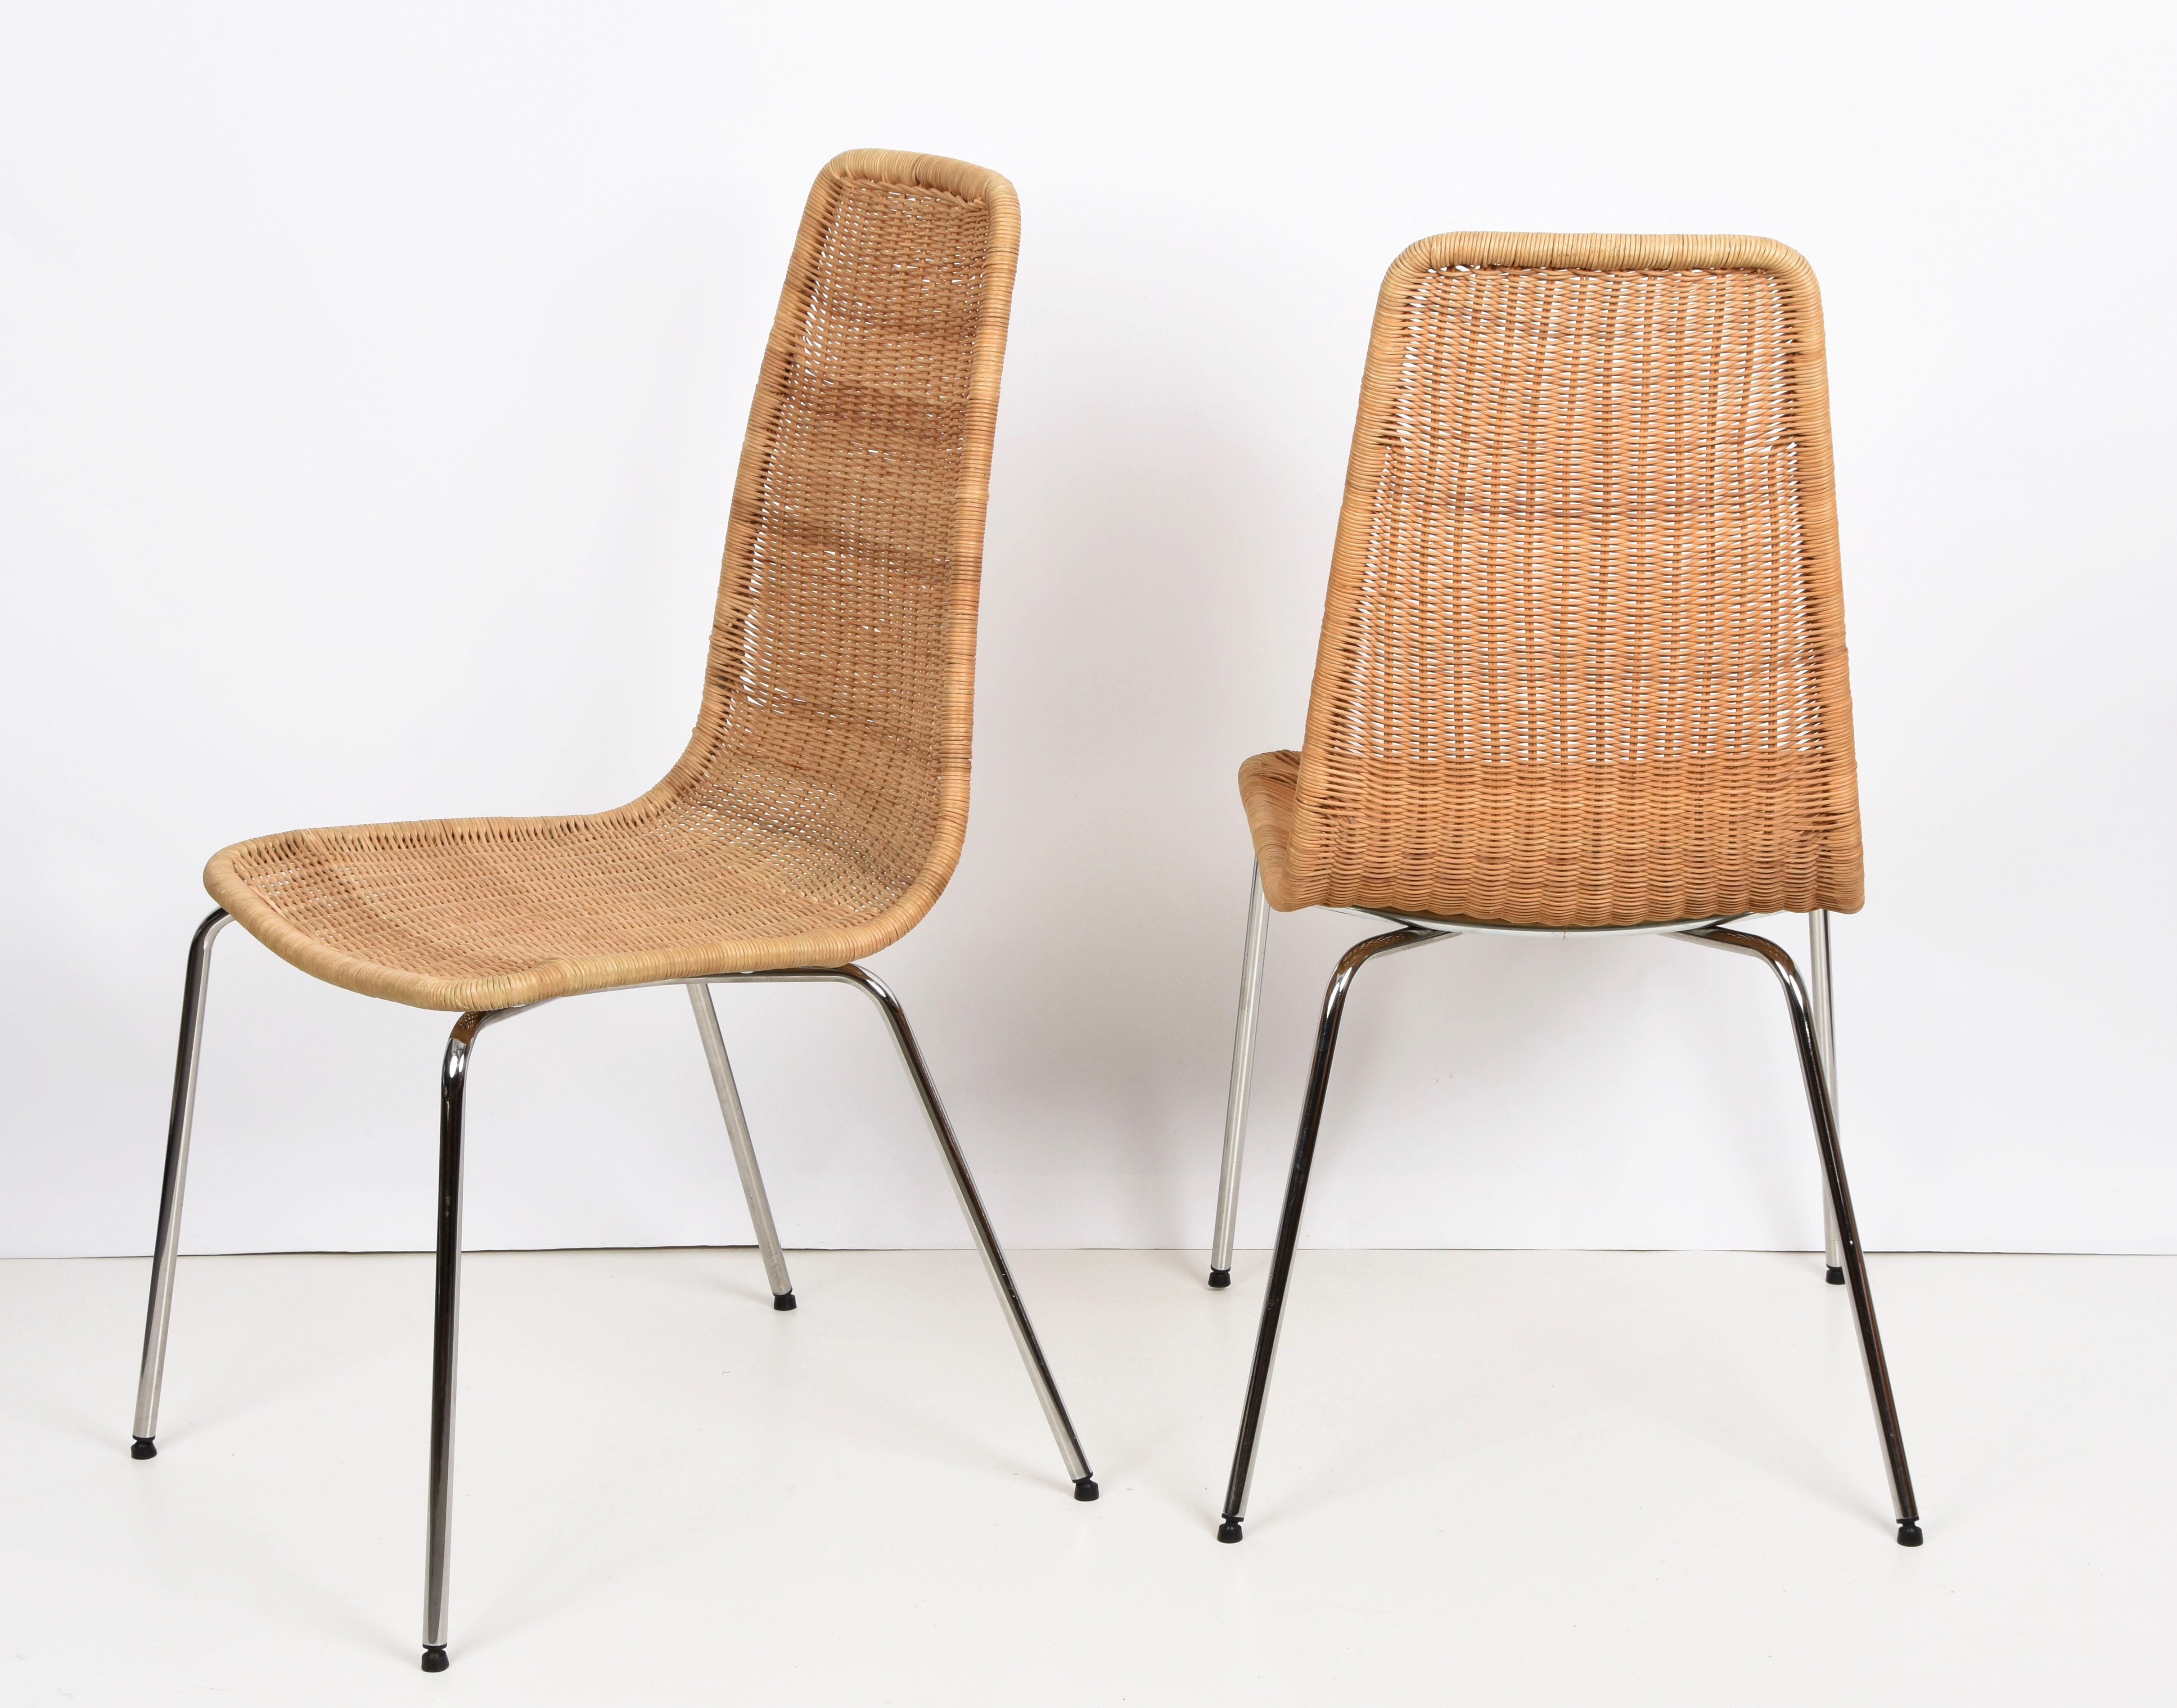 Midcentury Chromed Metal with Removable Rattan and Wicker Italian Chairs, 1970s For Sale 3